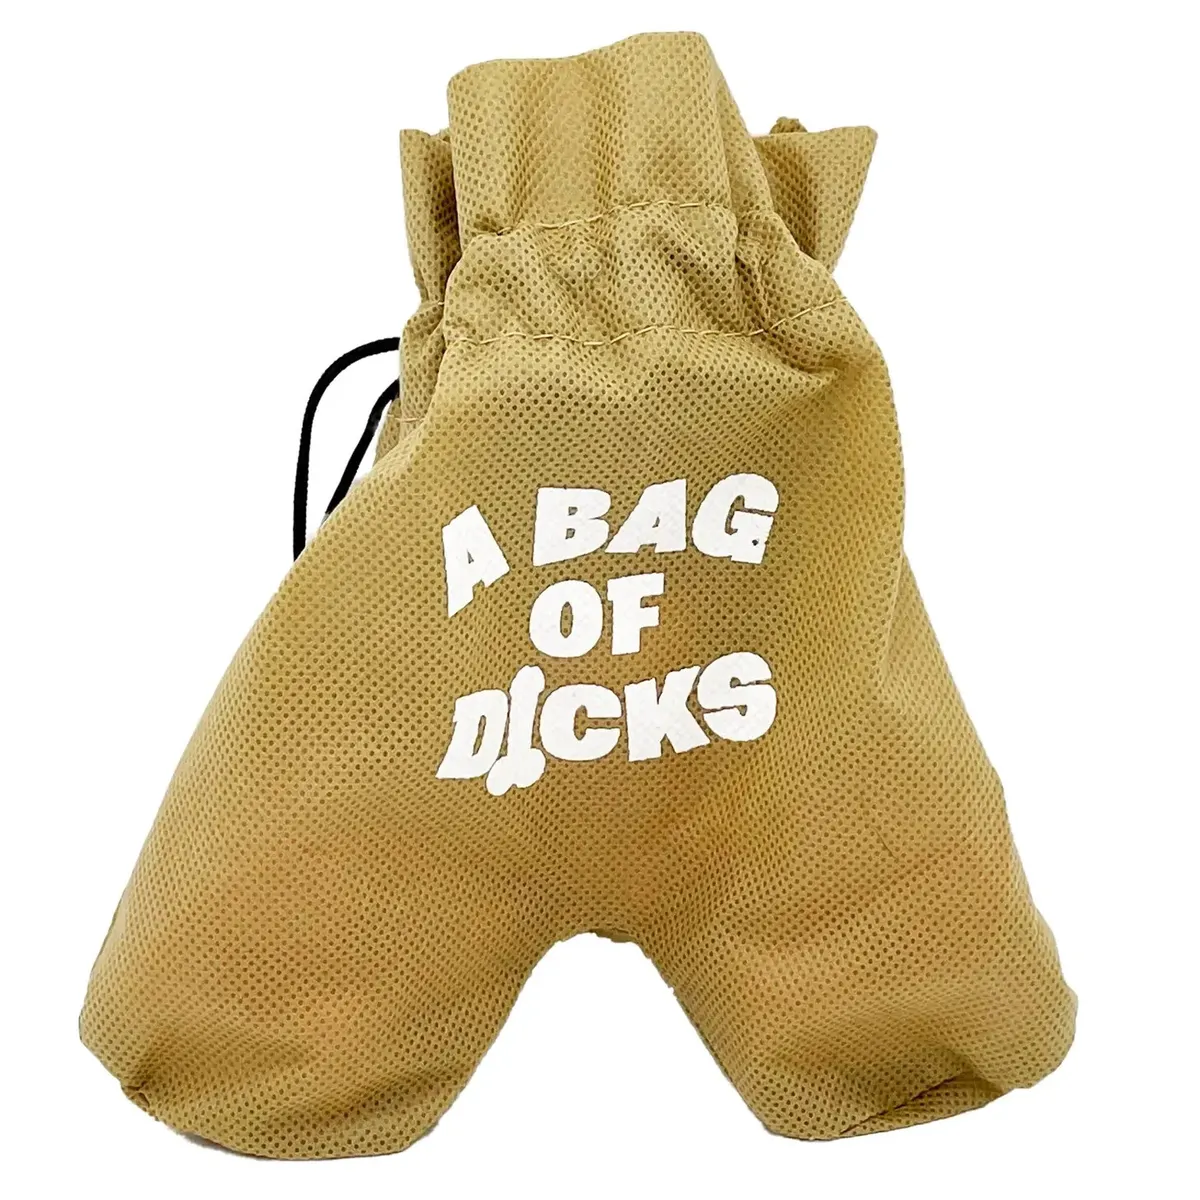 Best of Pics of ball sack